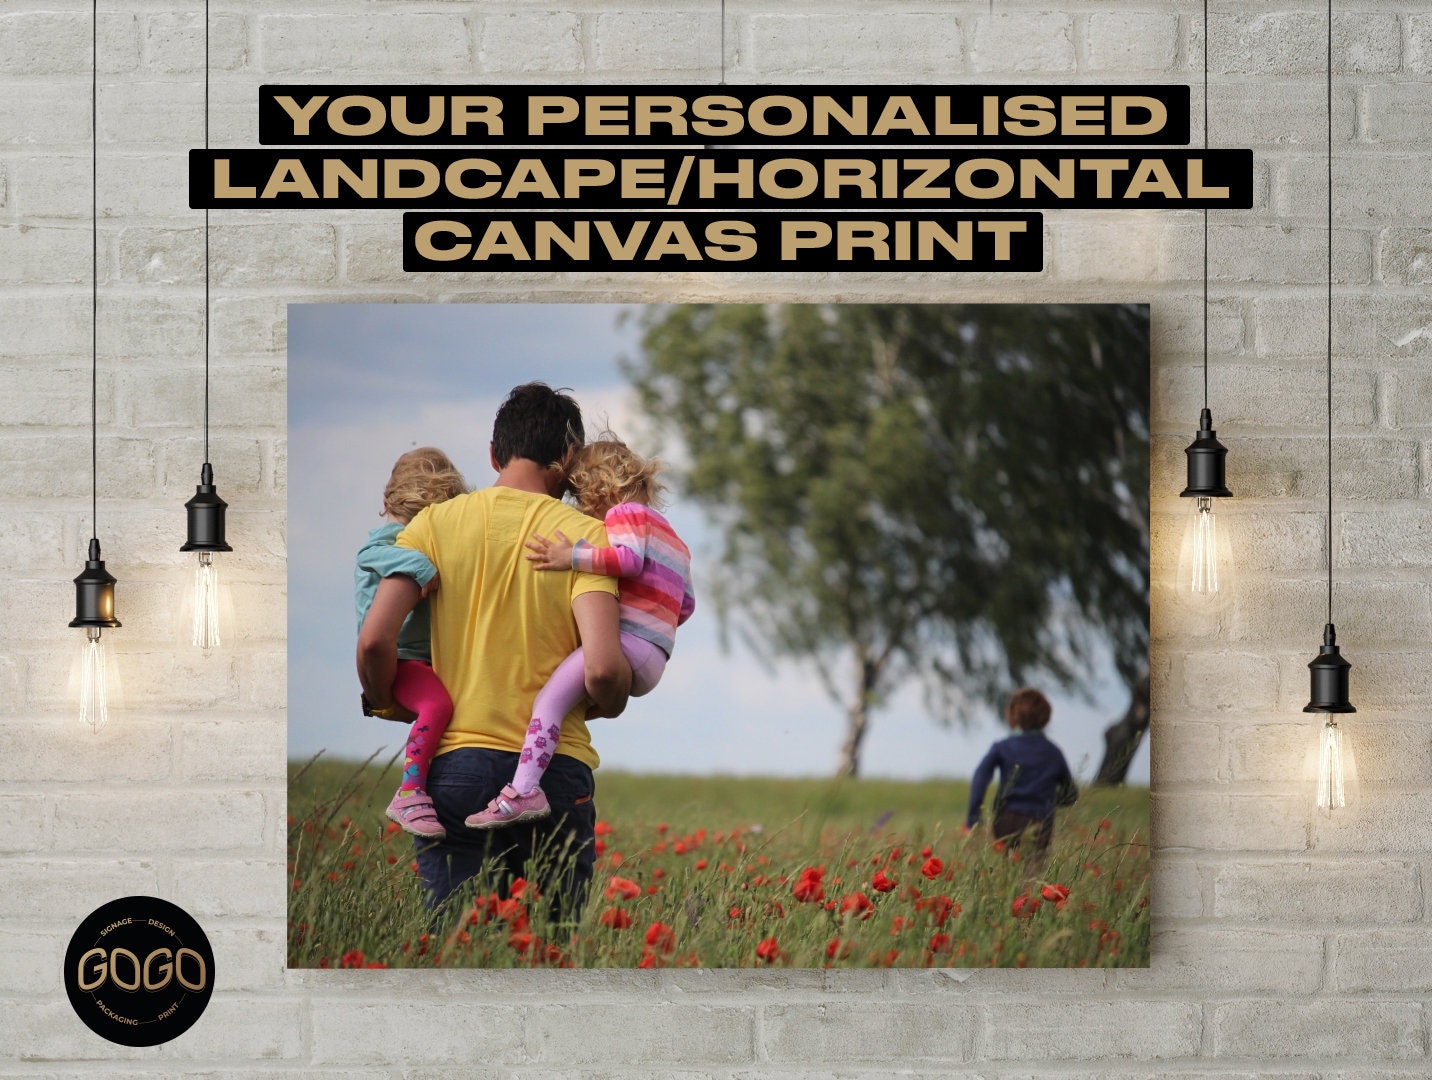 Landscape/Horizontal Personalised Canvas Prints ⎜ Your image Ready to hang